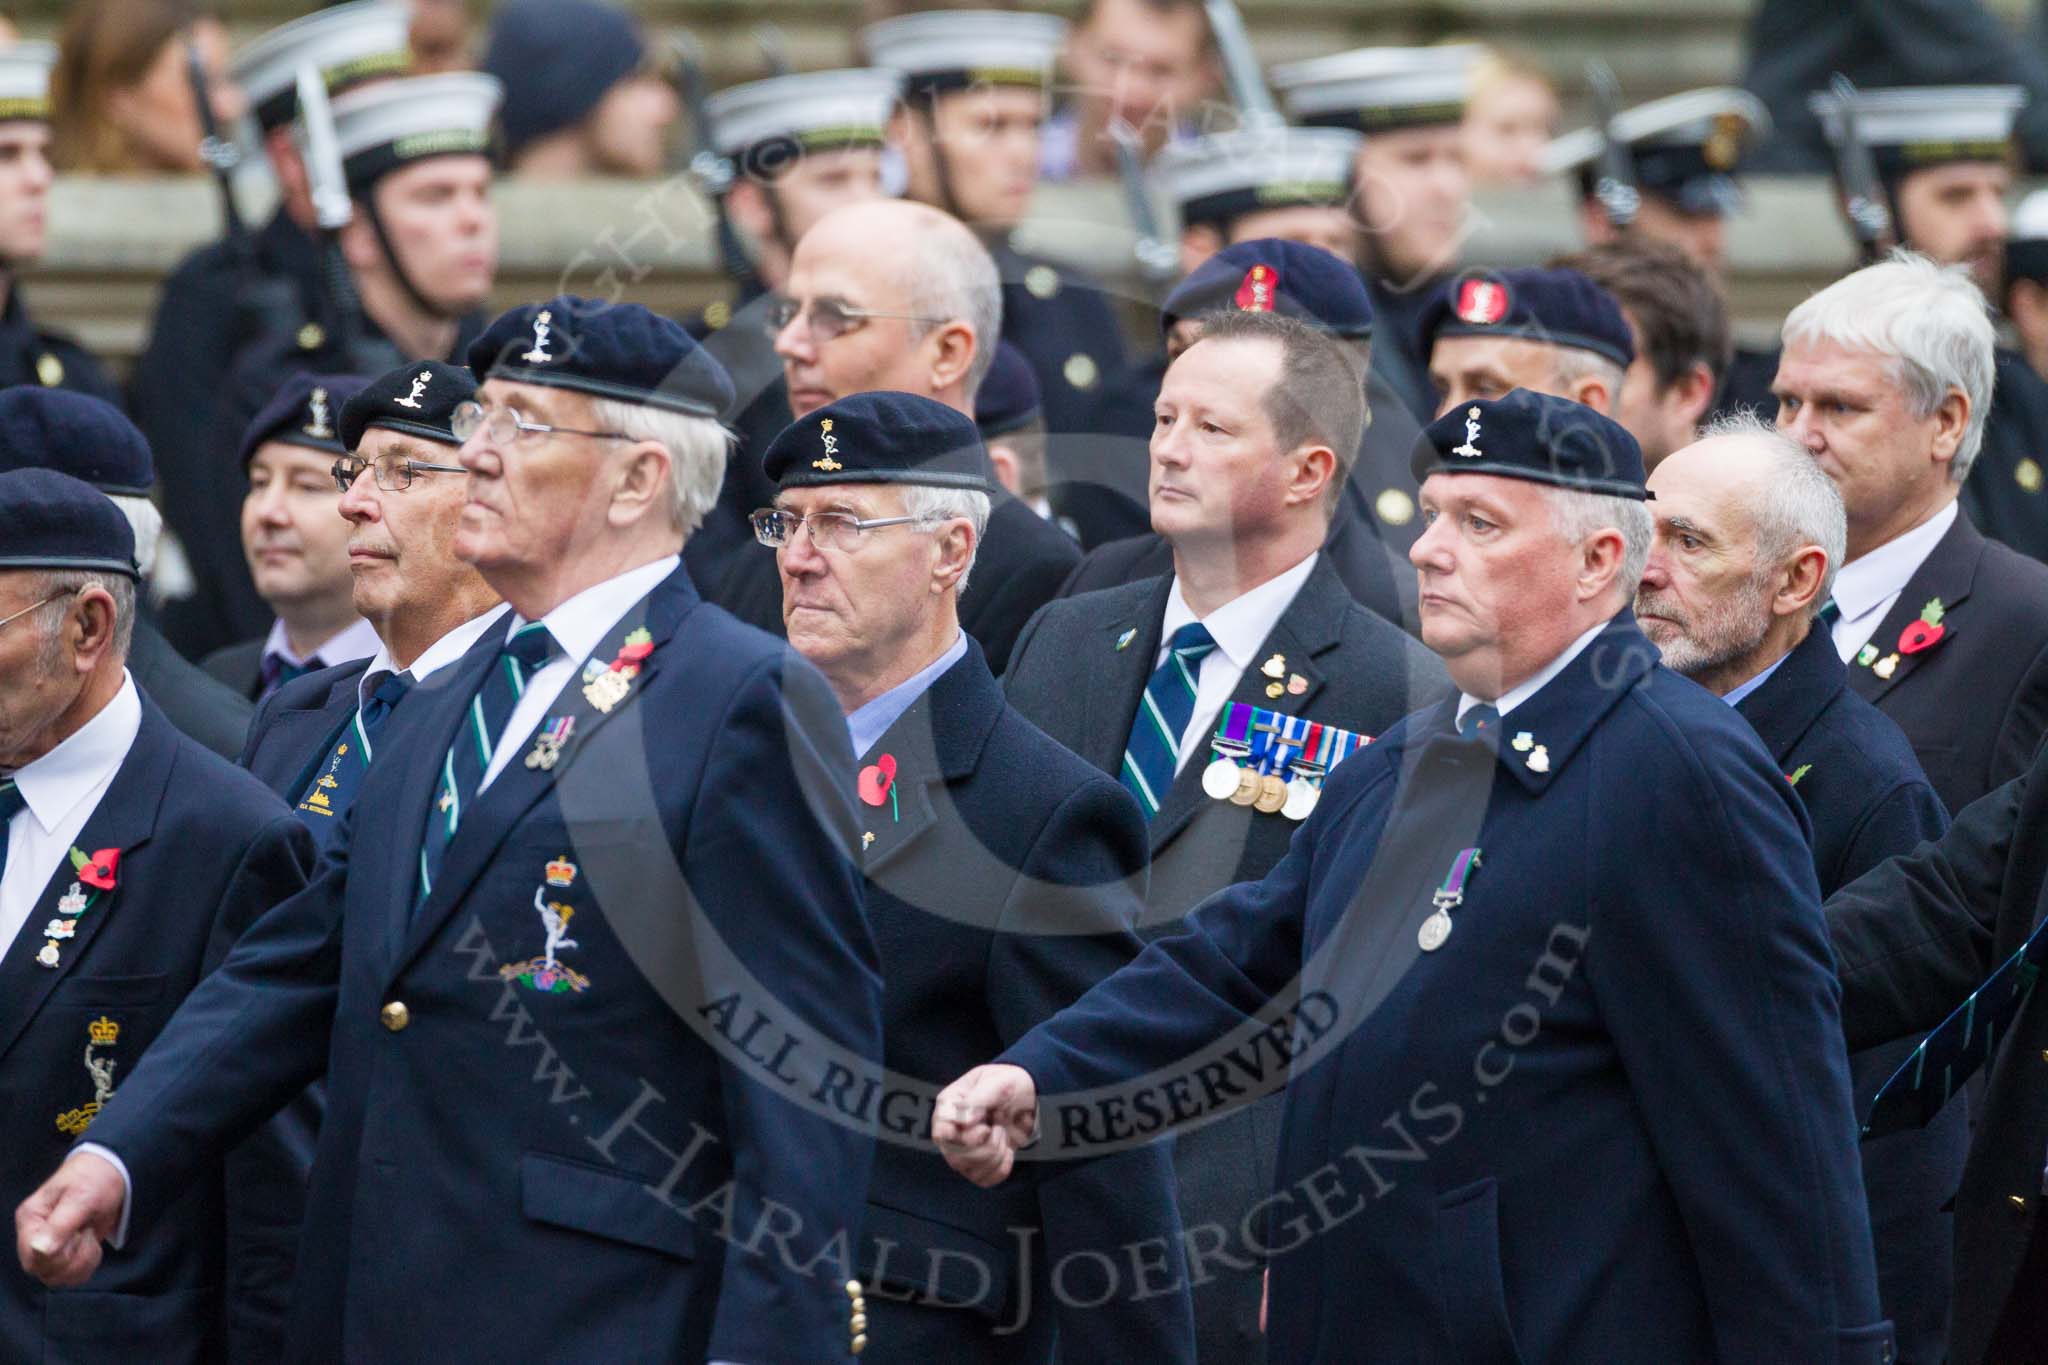 Remembrance Sunday at the Cenotaph 2015: Group B8, Royal Signals Association.
Cenotaph, Whitehall, London SW1,
London,
Greater London,
United Kingdom,
on 08 November 2015 at 11:37, image #64